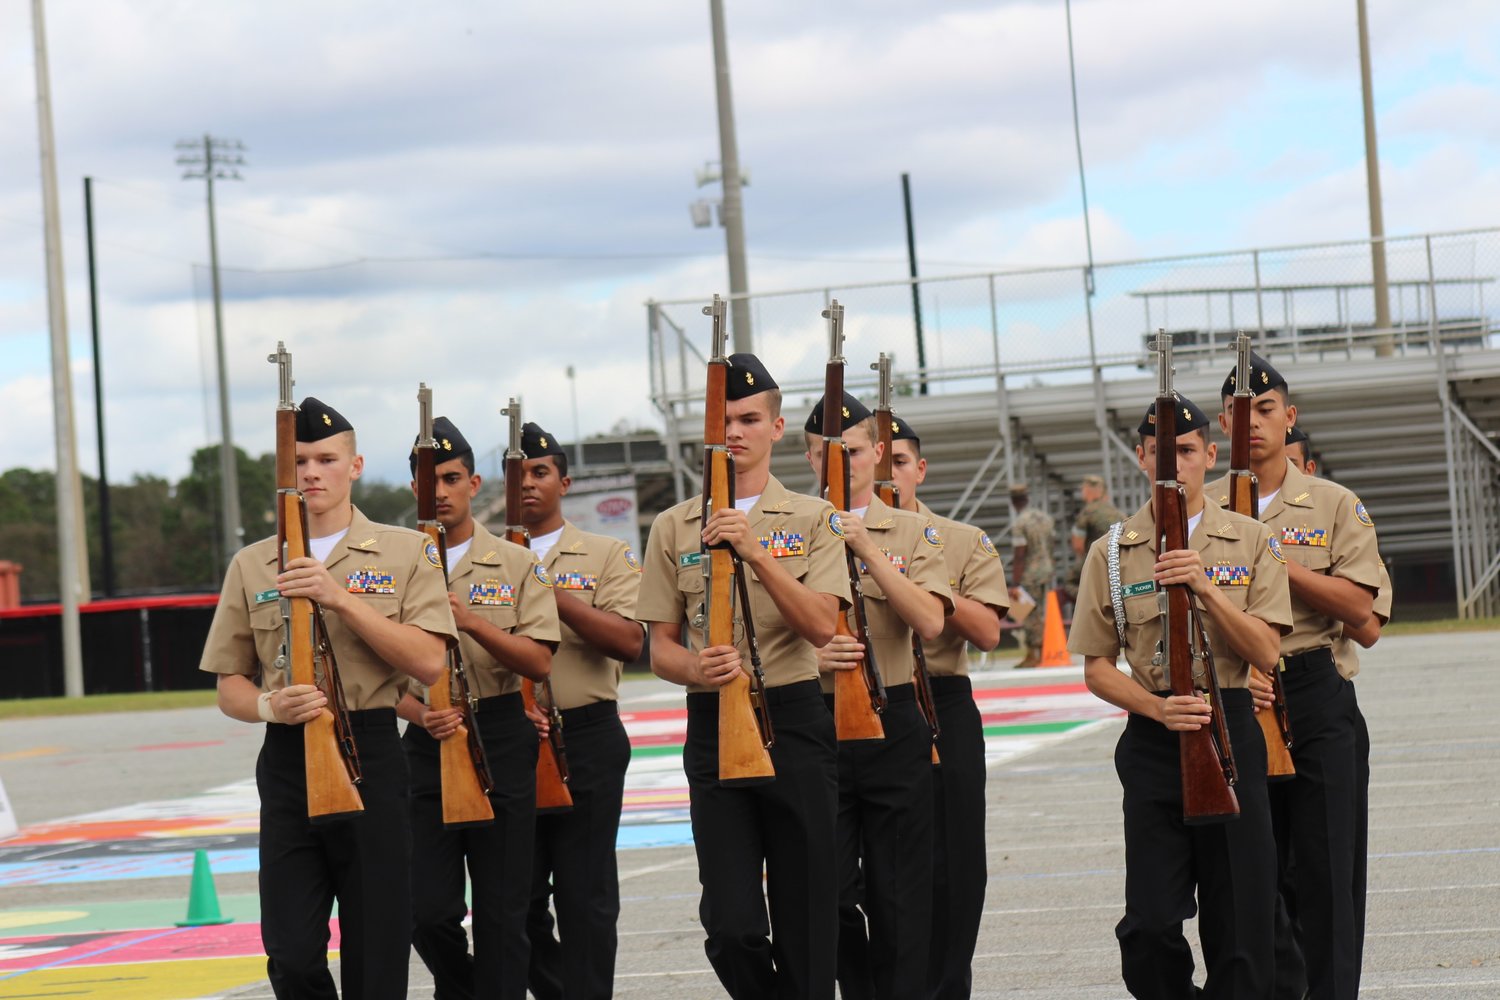 The armed exhibition drill team performs during the Sprayberry drill meet on Oct. 23 in Marietta, Georgia.